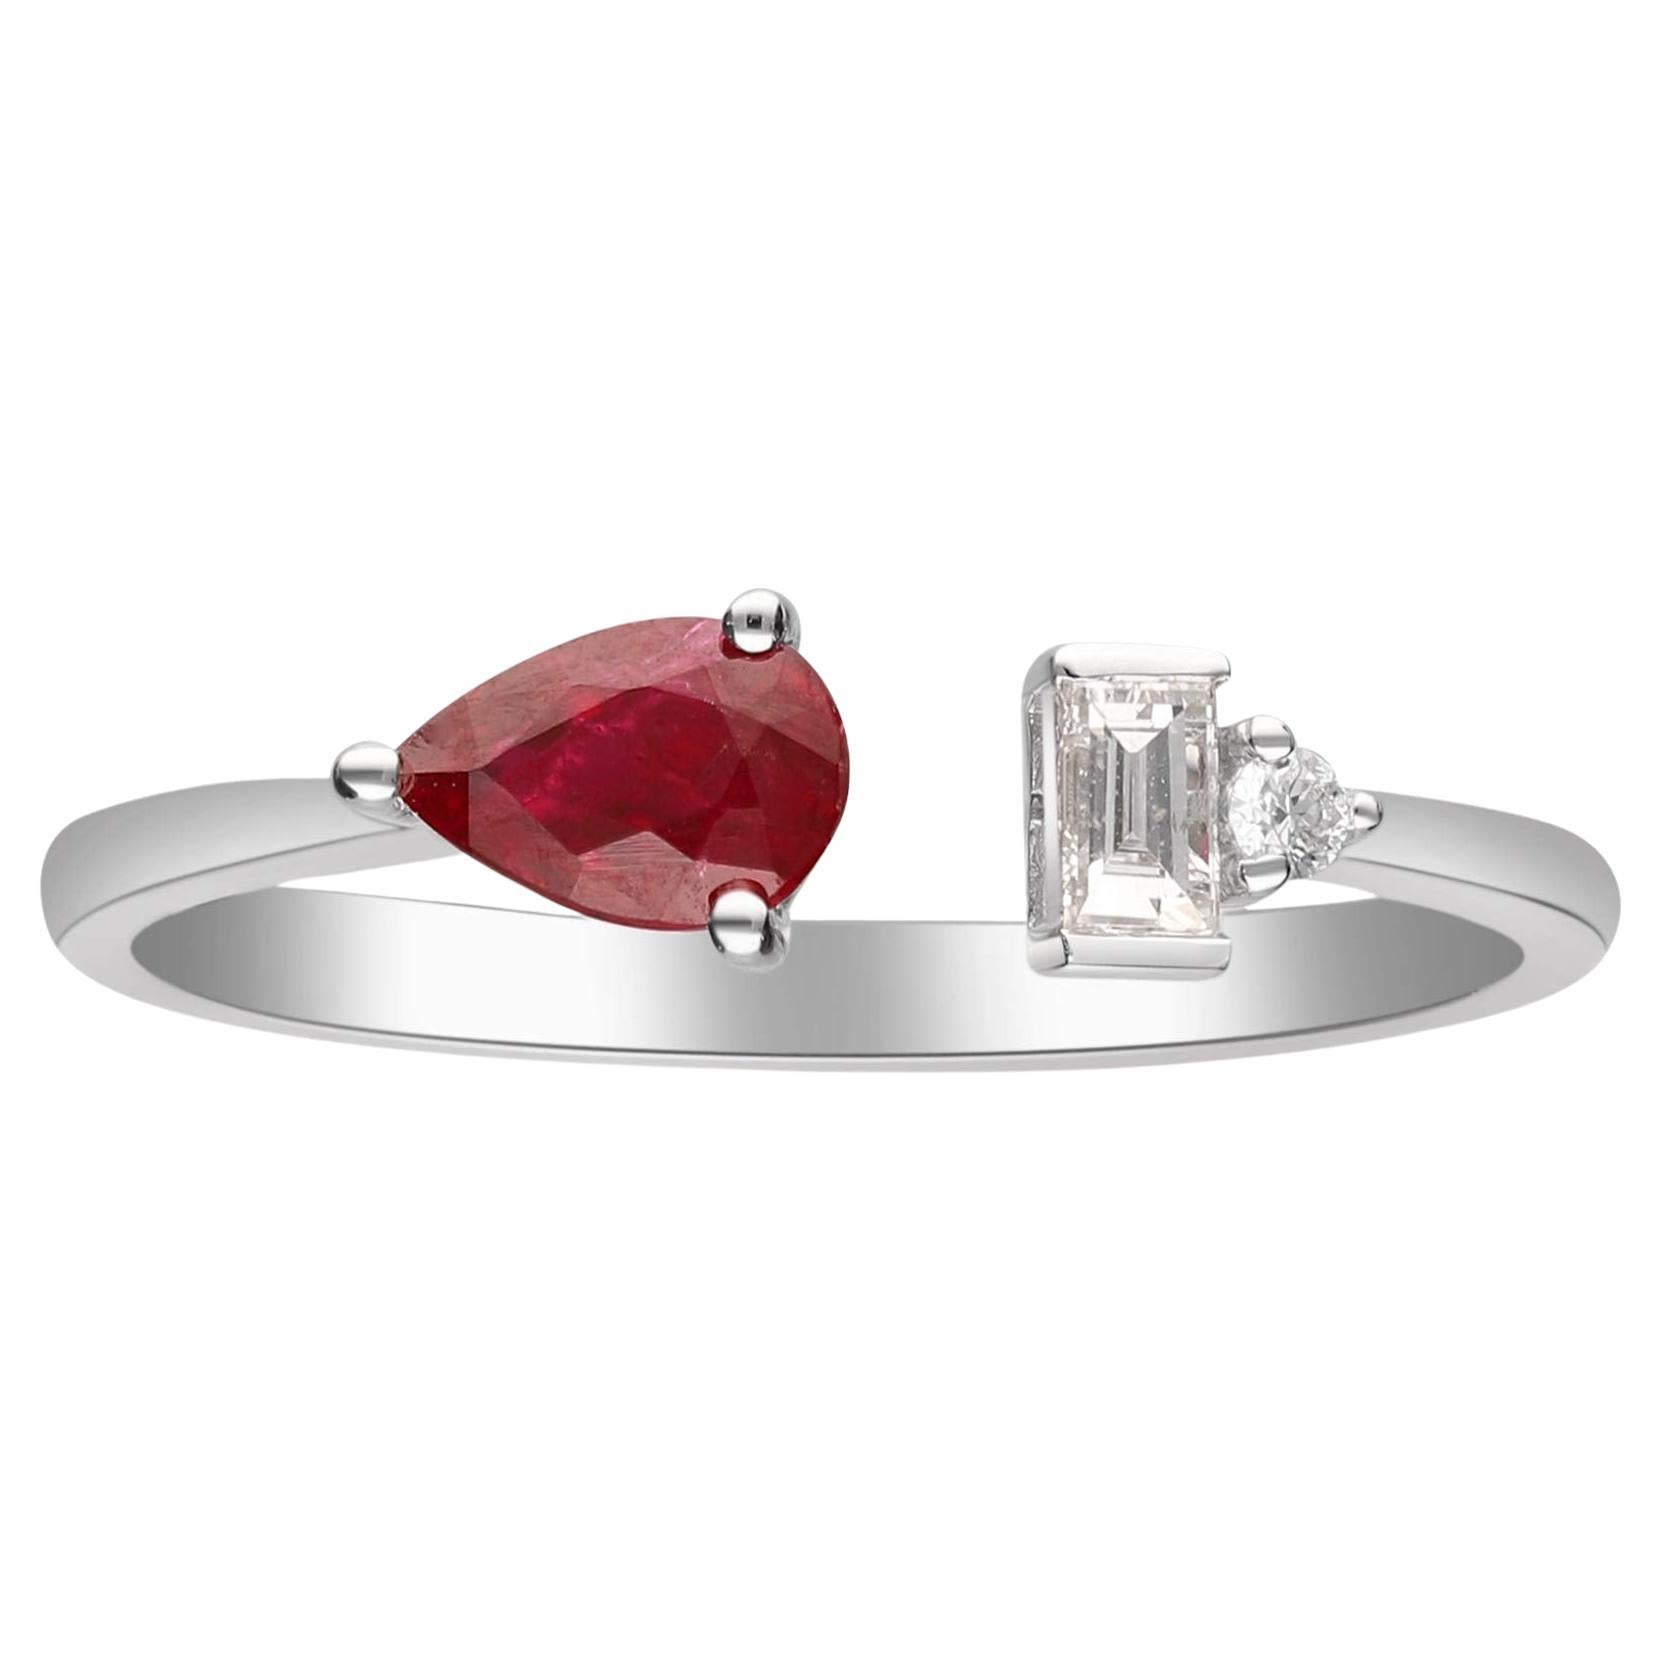 0.55 Carat Pear-Cut Ruby with Diamond Accents 18K White Gold Ring For Sale